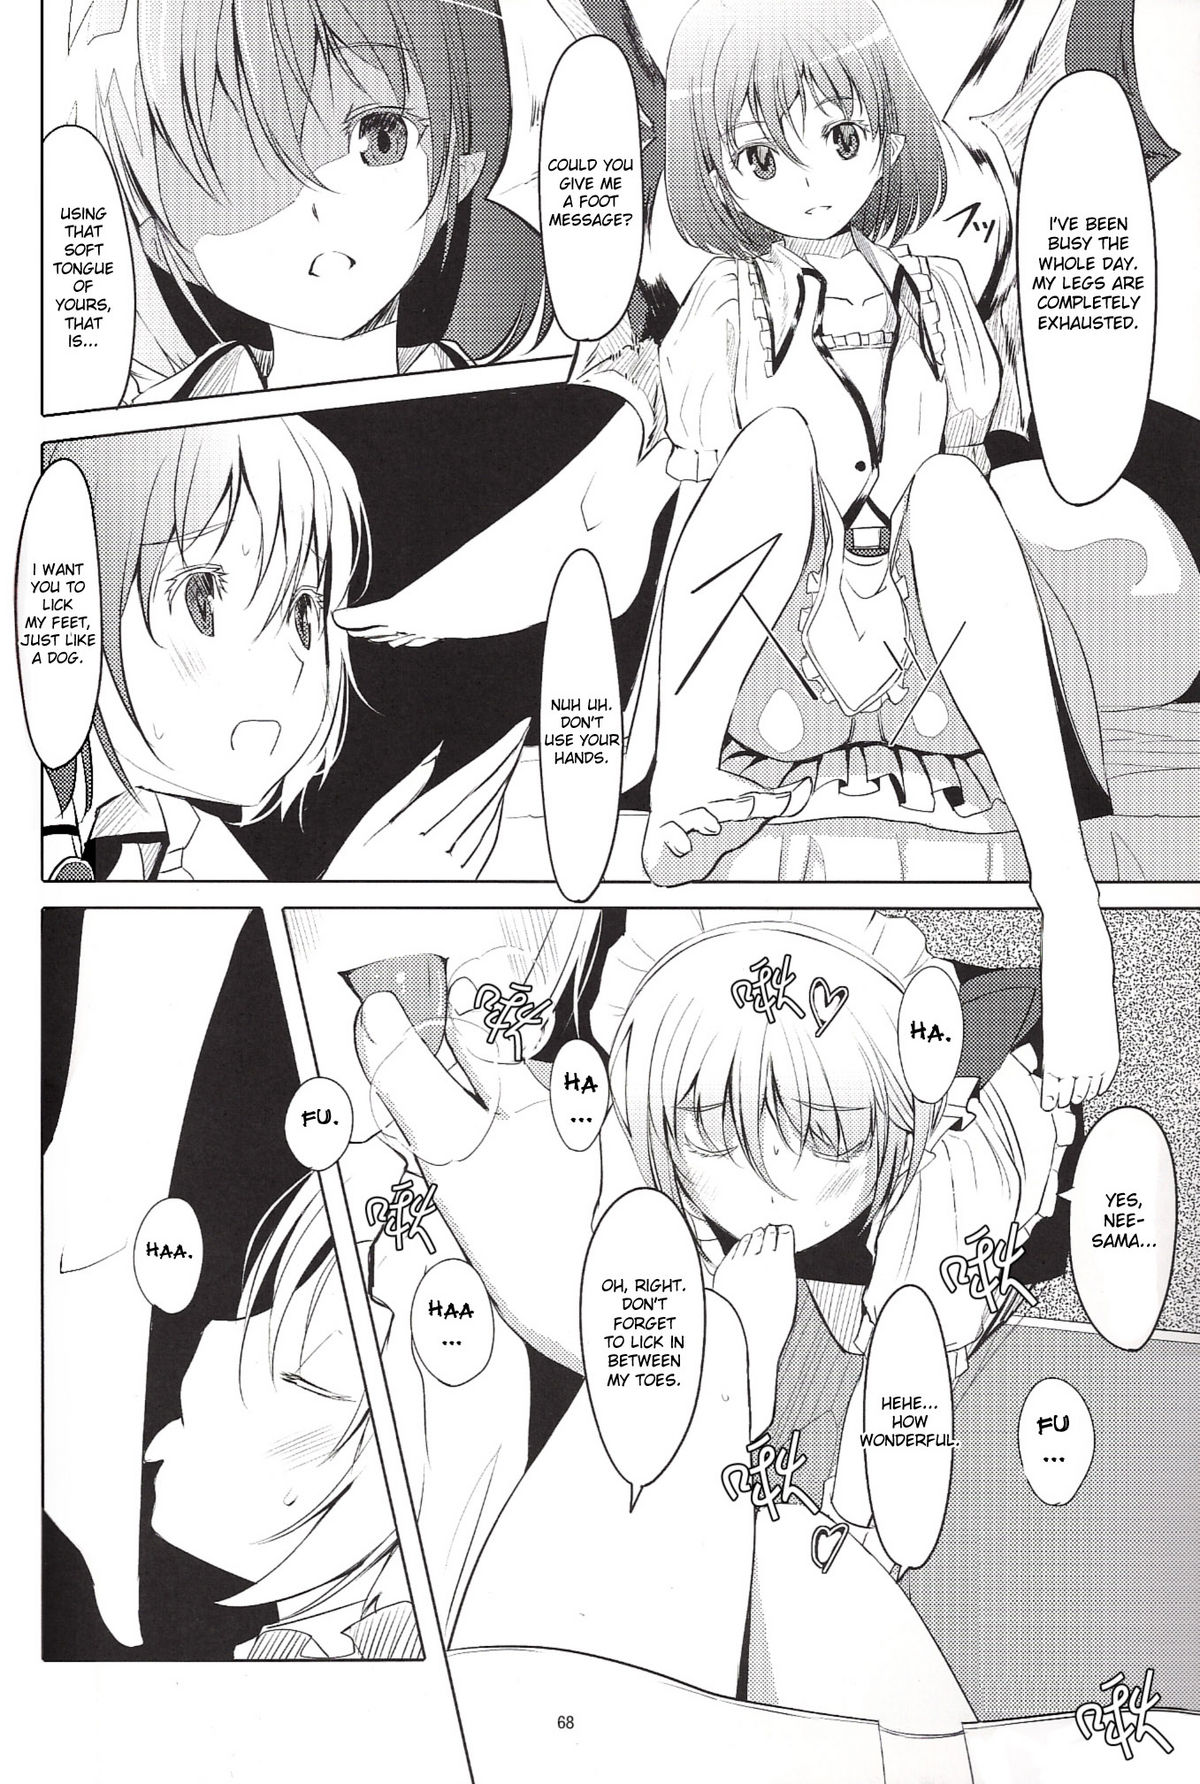 [telomereNA (Gustav)] S-2:Scarlet Sisters (Touhou Project) [English] [desudesu] [Incomplete] page 7 full